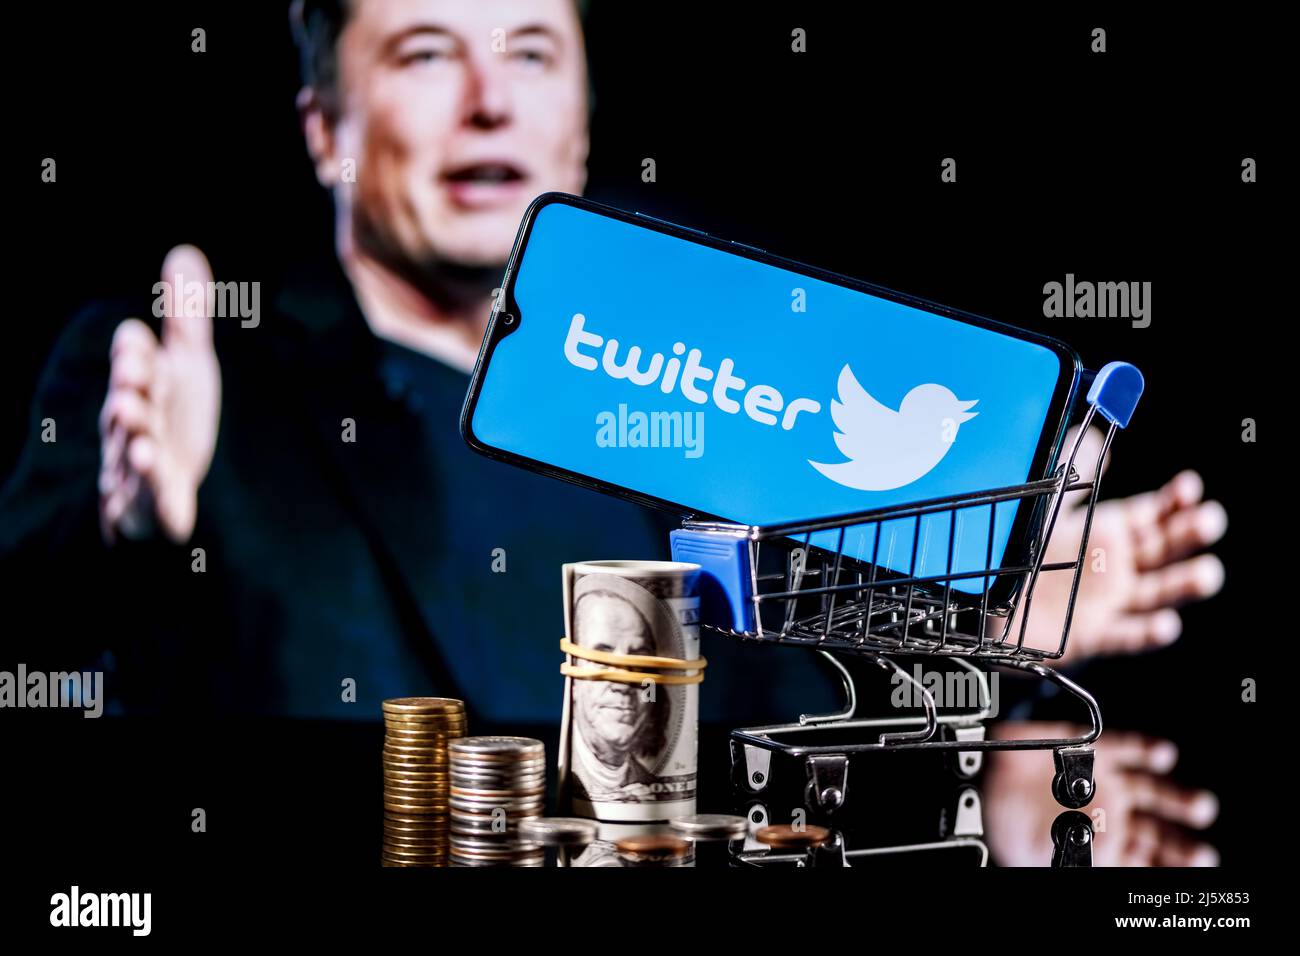 Logo of social network Twitter on smartphone screen in shopping cart with money and photo Elon Musk in background. Stock Photo